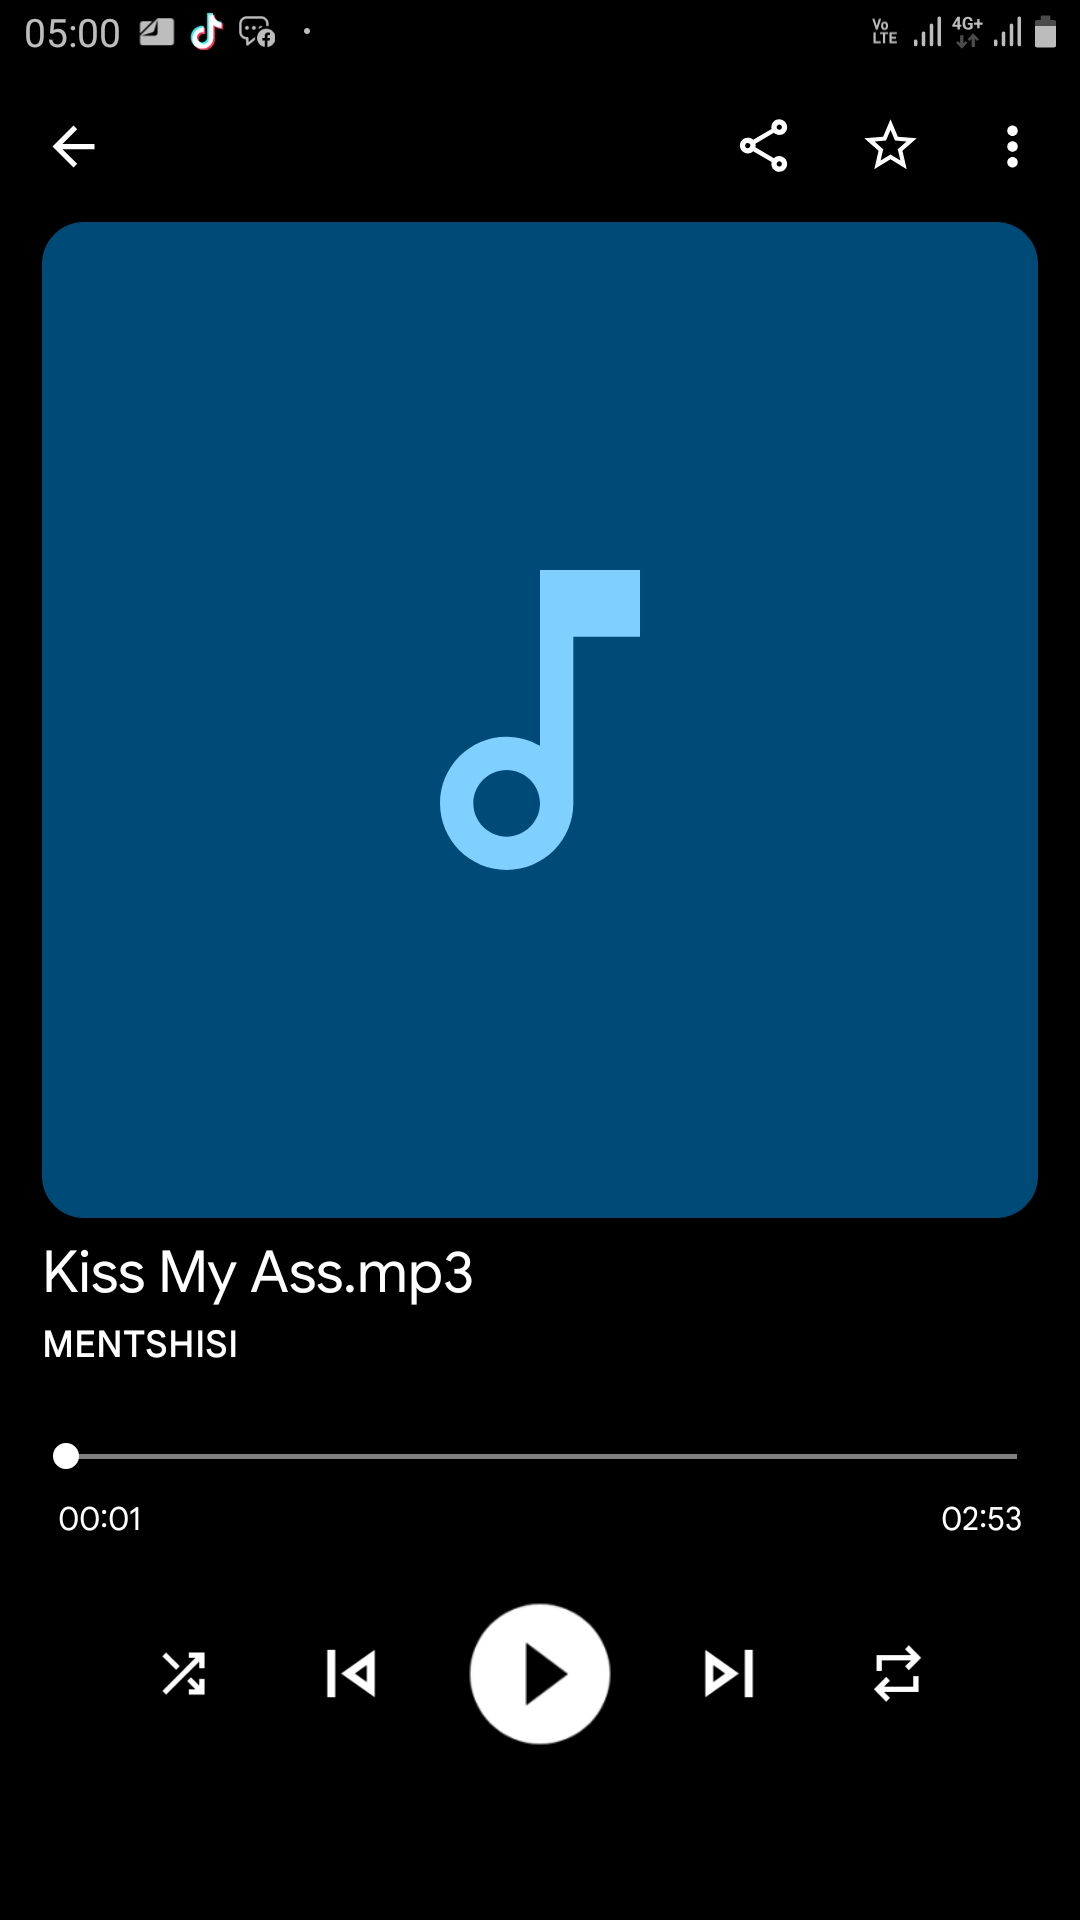 Kiss my ass - Mentshisi